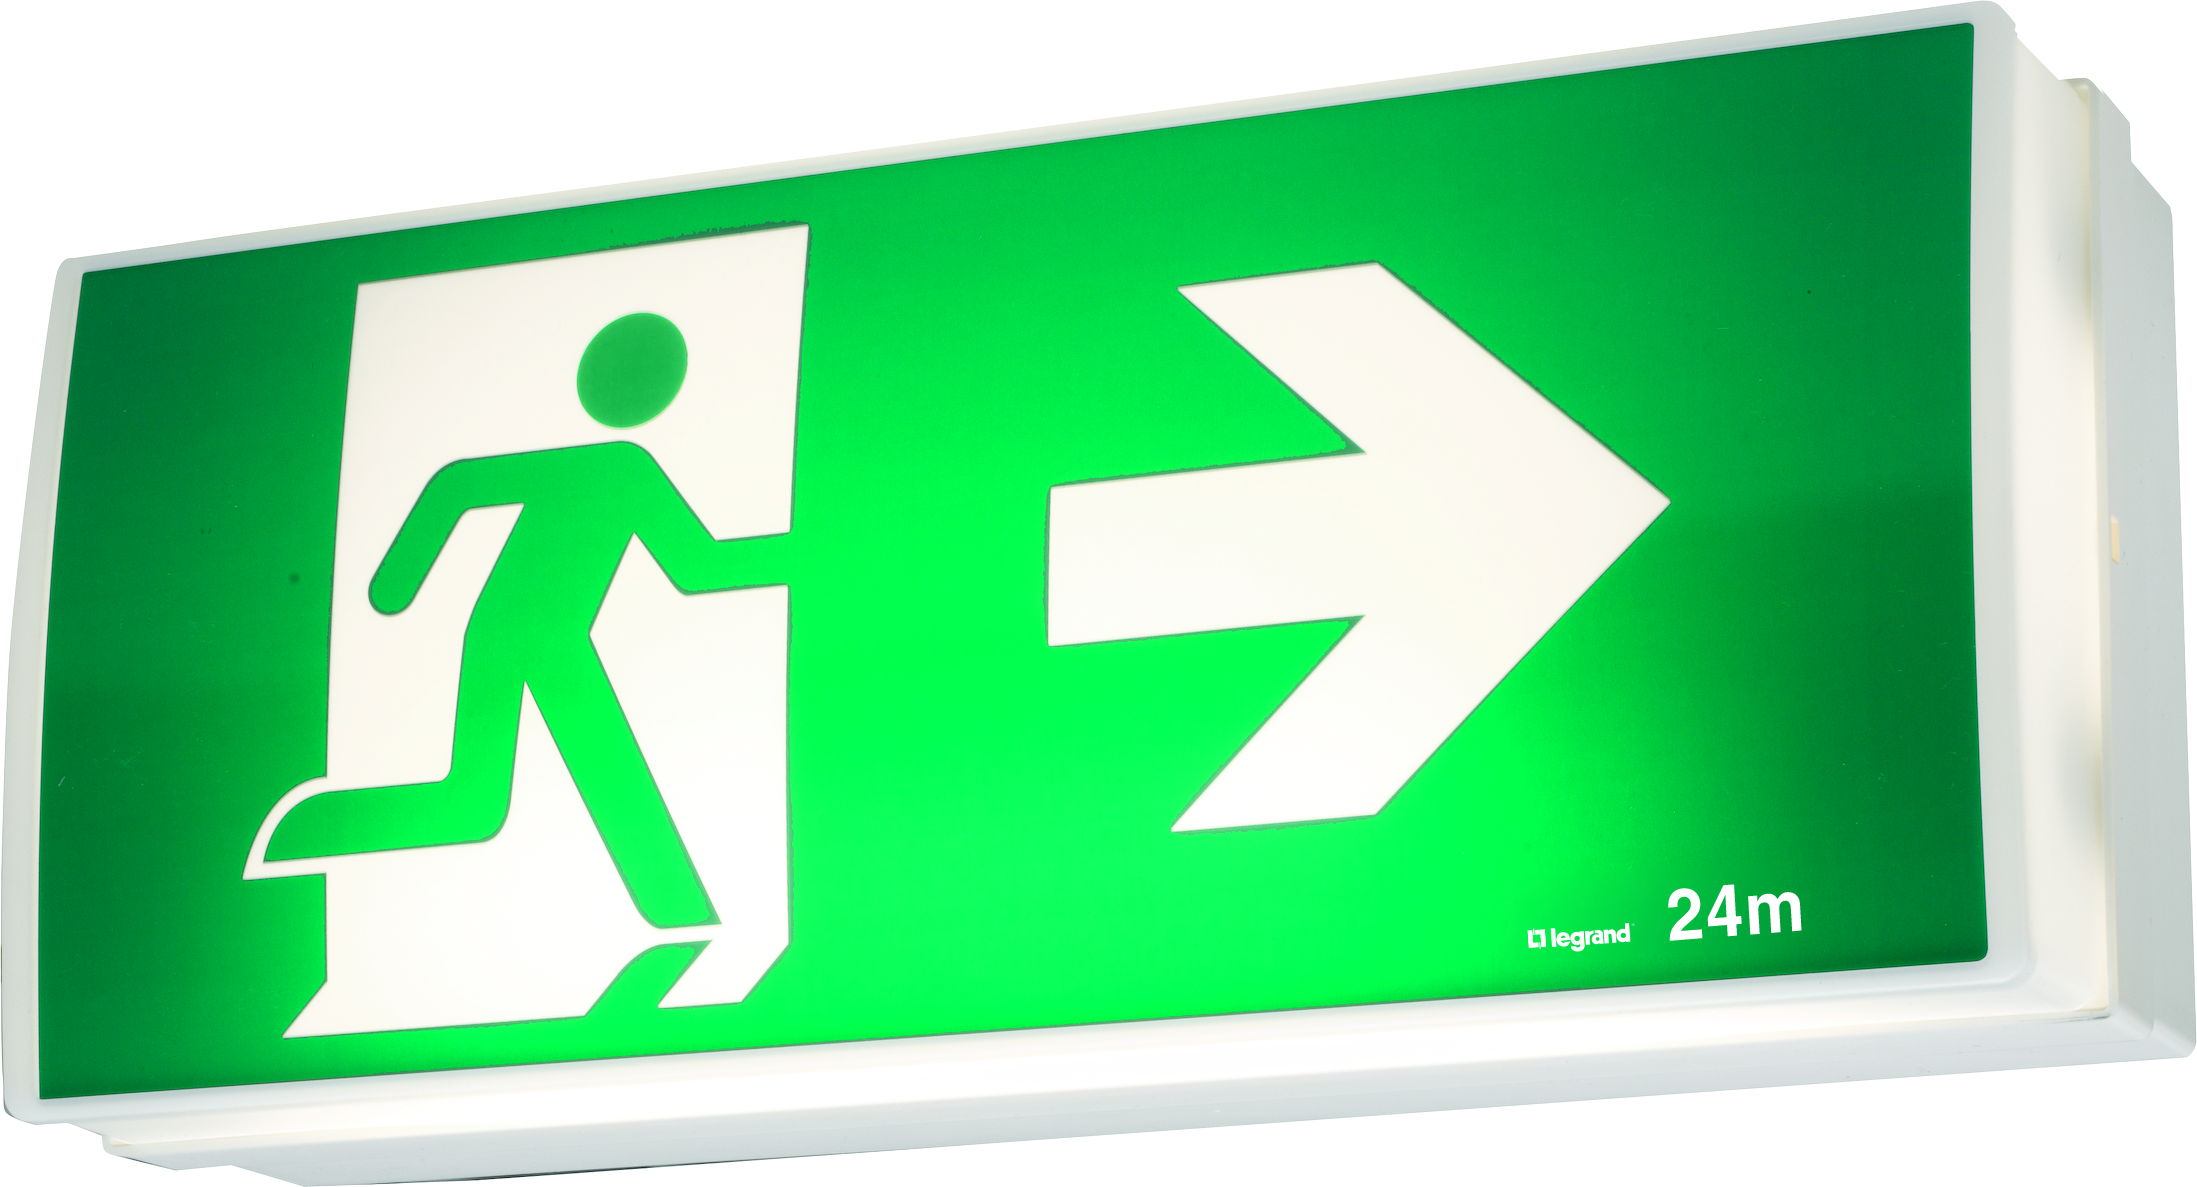 Latest from Legrand: Economy LED Exit Sign | Voltimum